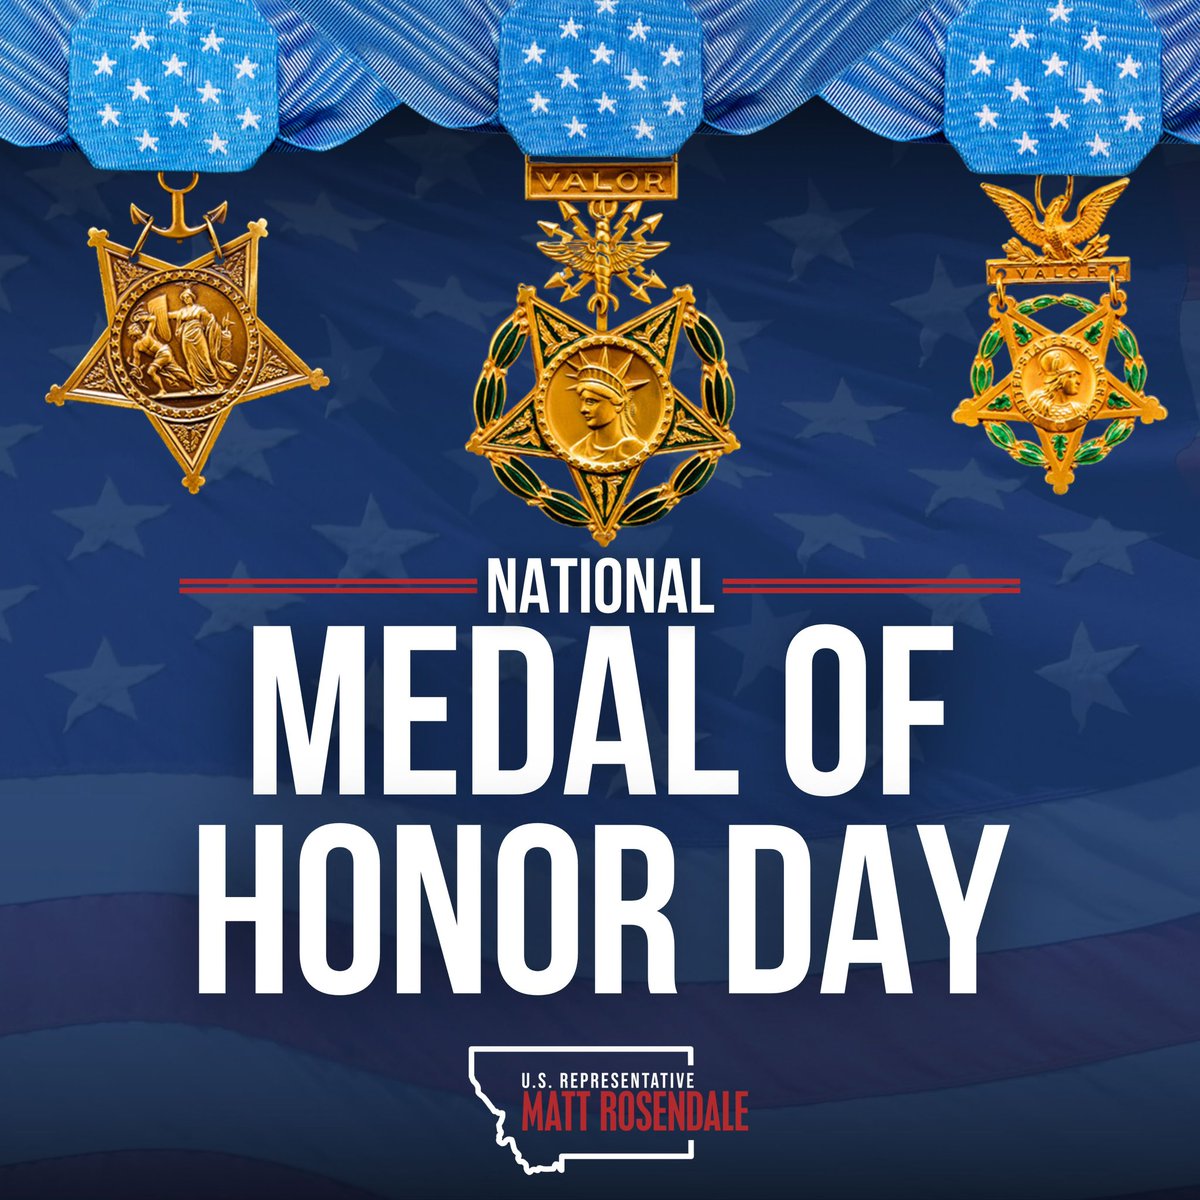 Today, on National Medal of Honor Day, we honor the brave and resilient men and women who have earned our military’s highest award for distinguished acts of service. We shall never forget their heroic acts to protect our great nation!